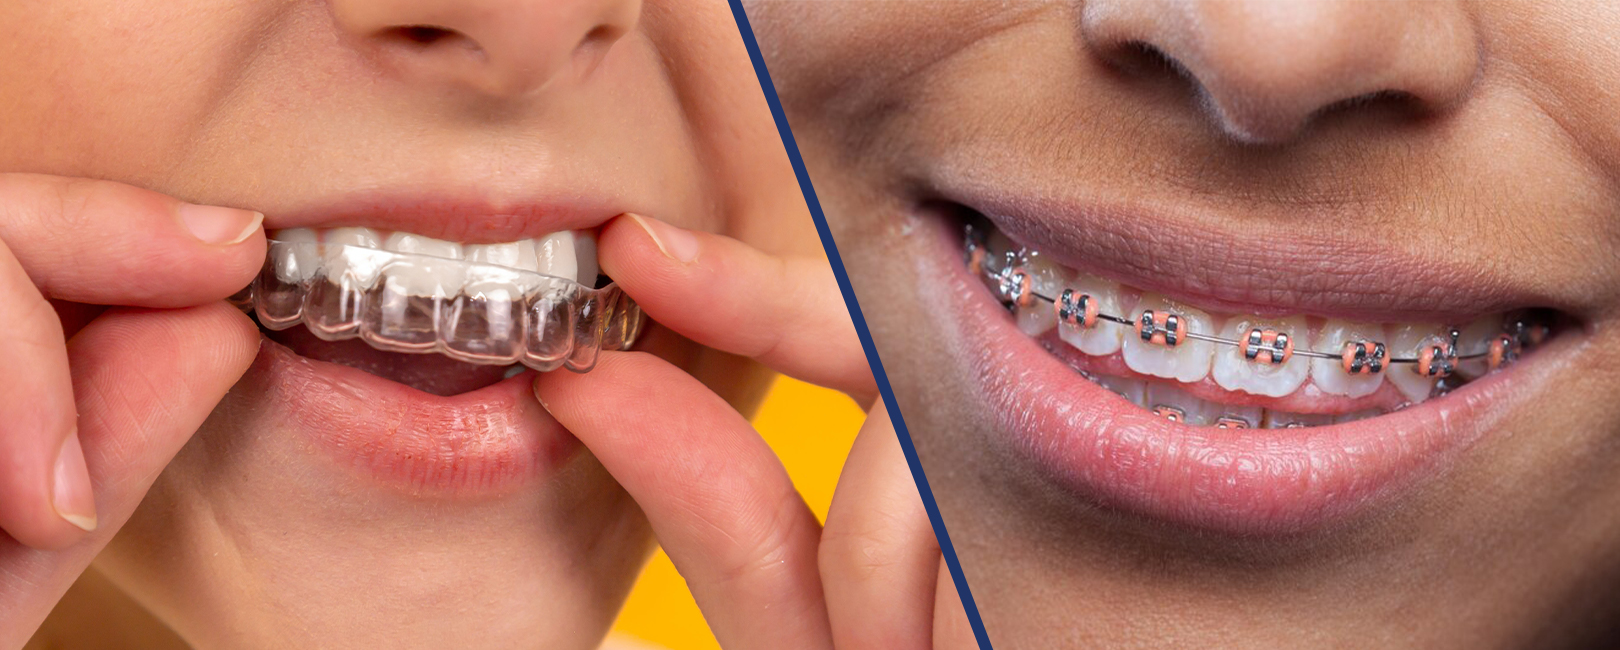 Clear Aligners vs Clear Braces